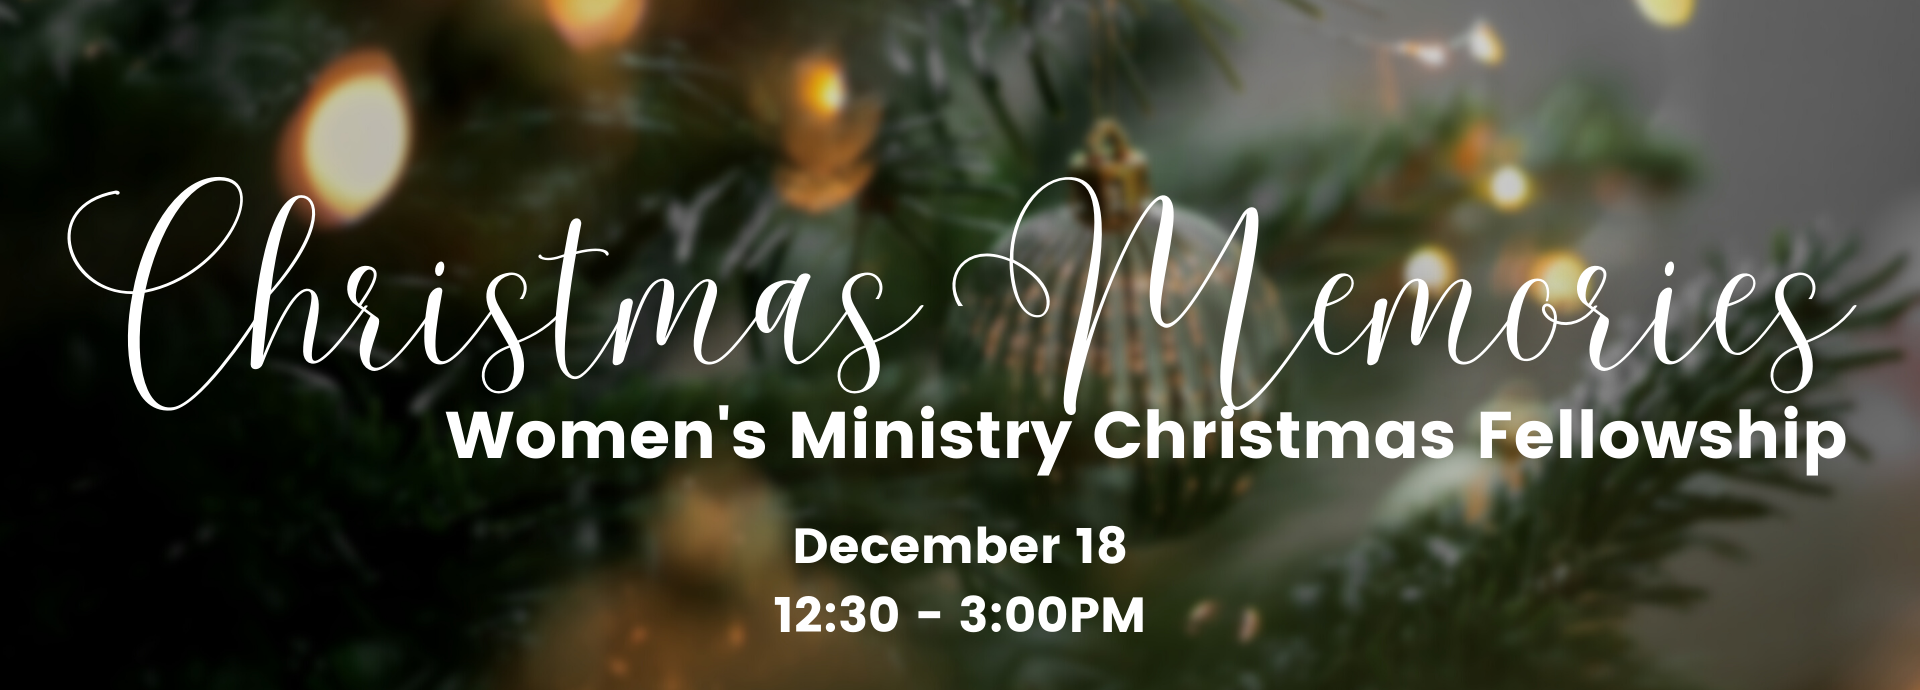 Christmas Memories • Women’s Ministry Event • 12/18 @ 12:30PM